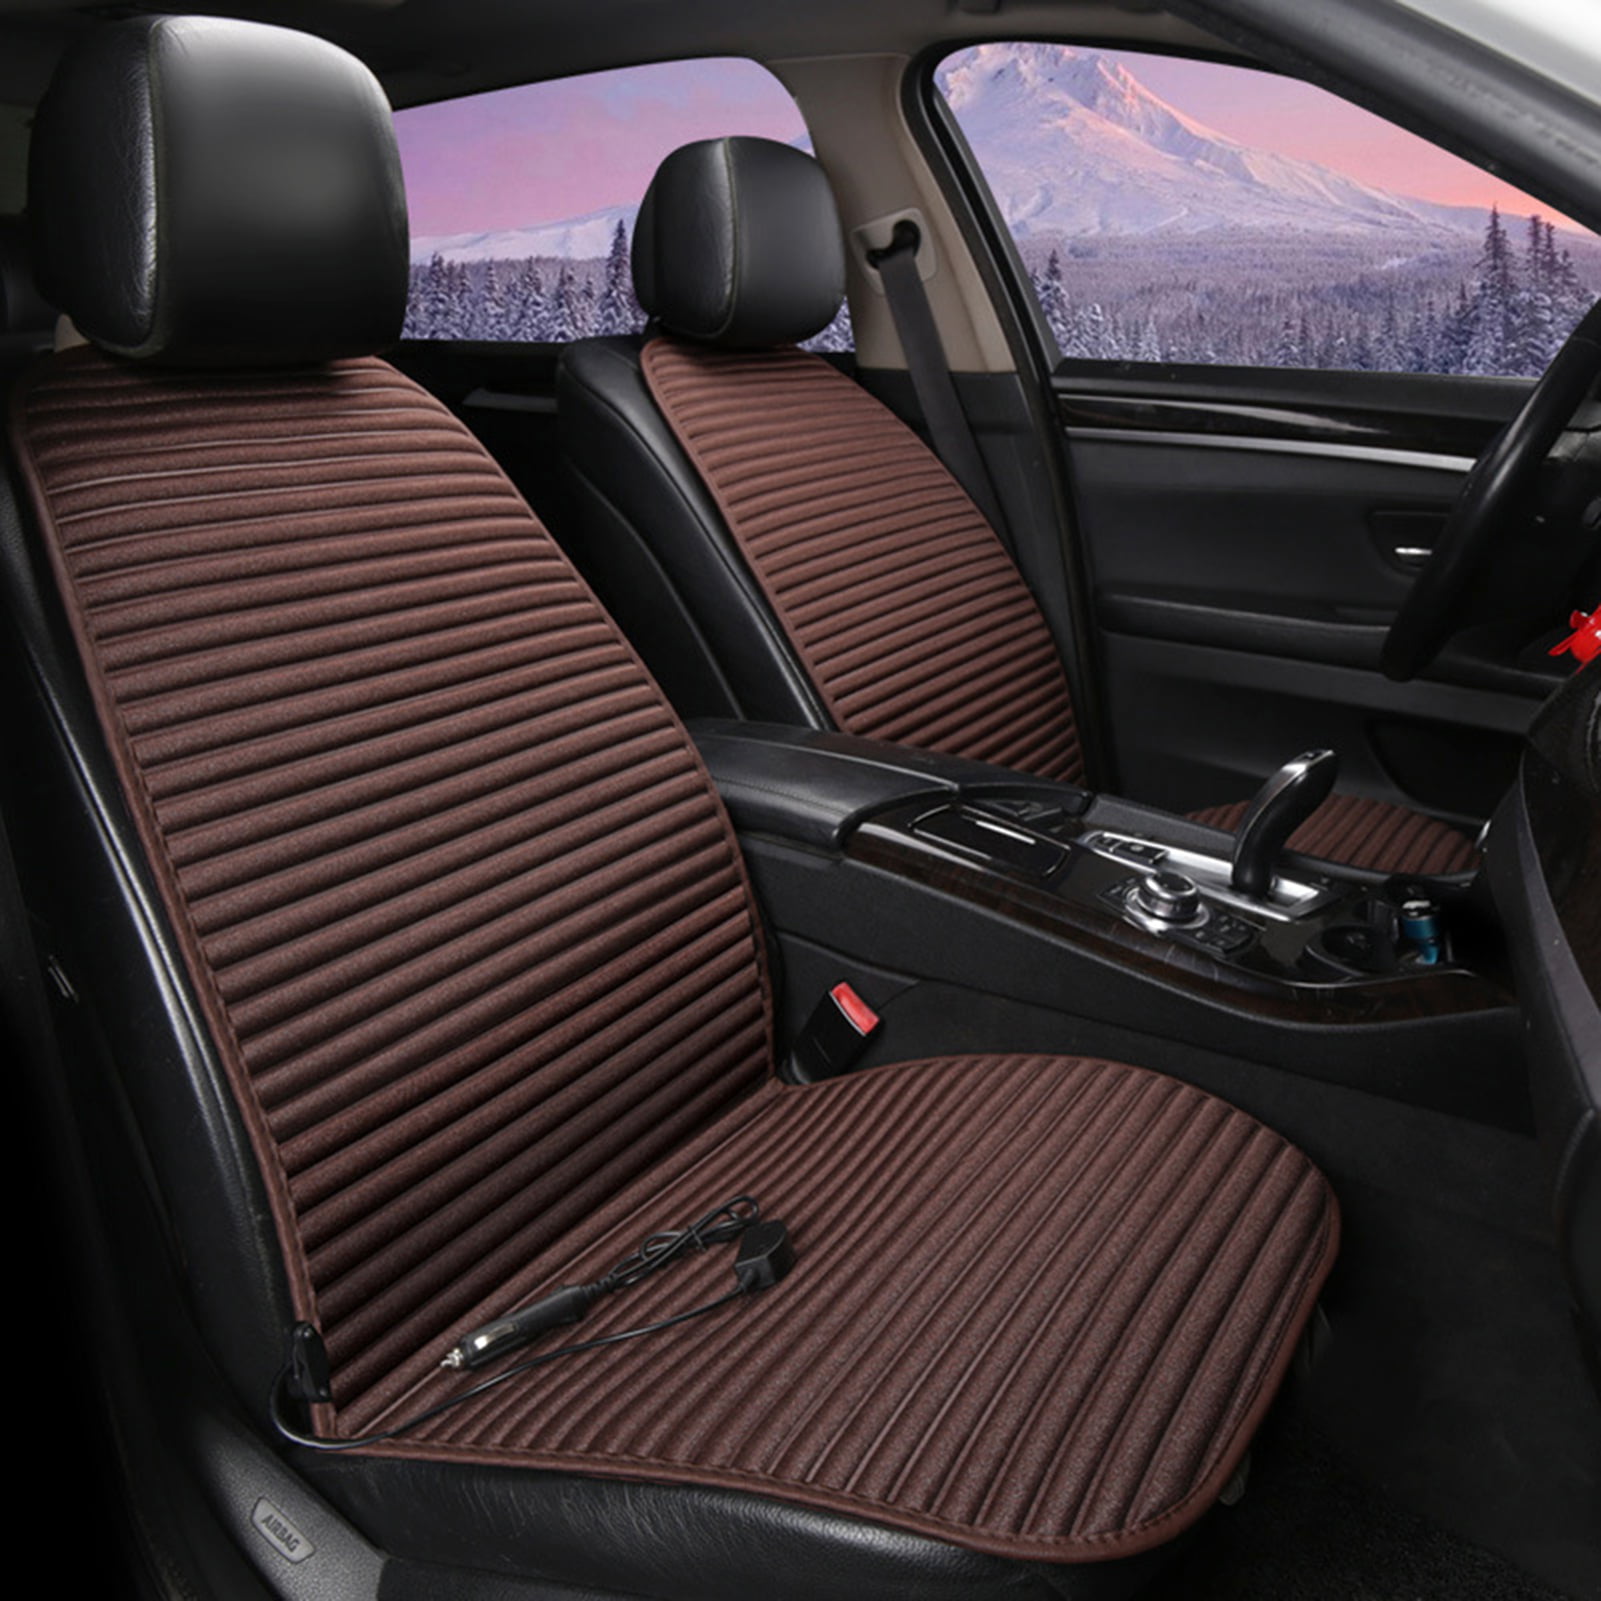 17.6inch ALLOMN Car Heated Seat Cushion 45cm/17.6 Winter Car Front Seat Heating Pad Cover Main Front Driver’s Seat Hot Warmer HI/LO Mode 40℃ 60℃ DC 12V 45 